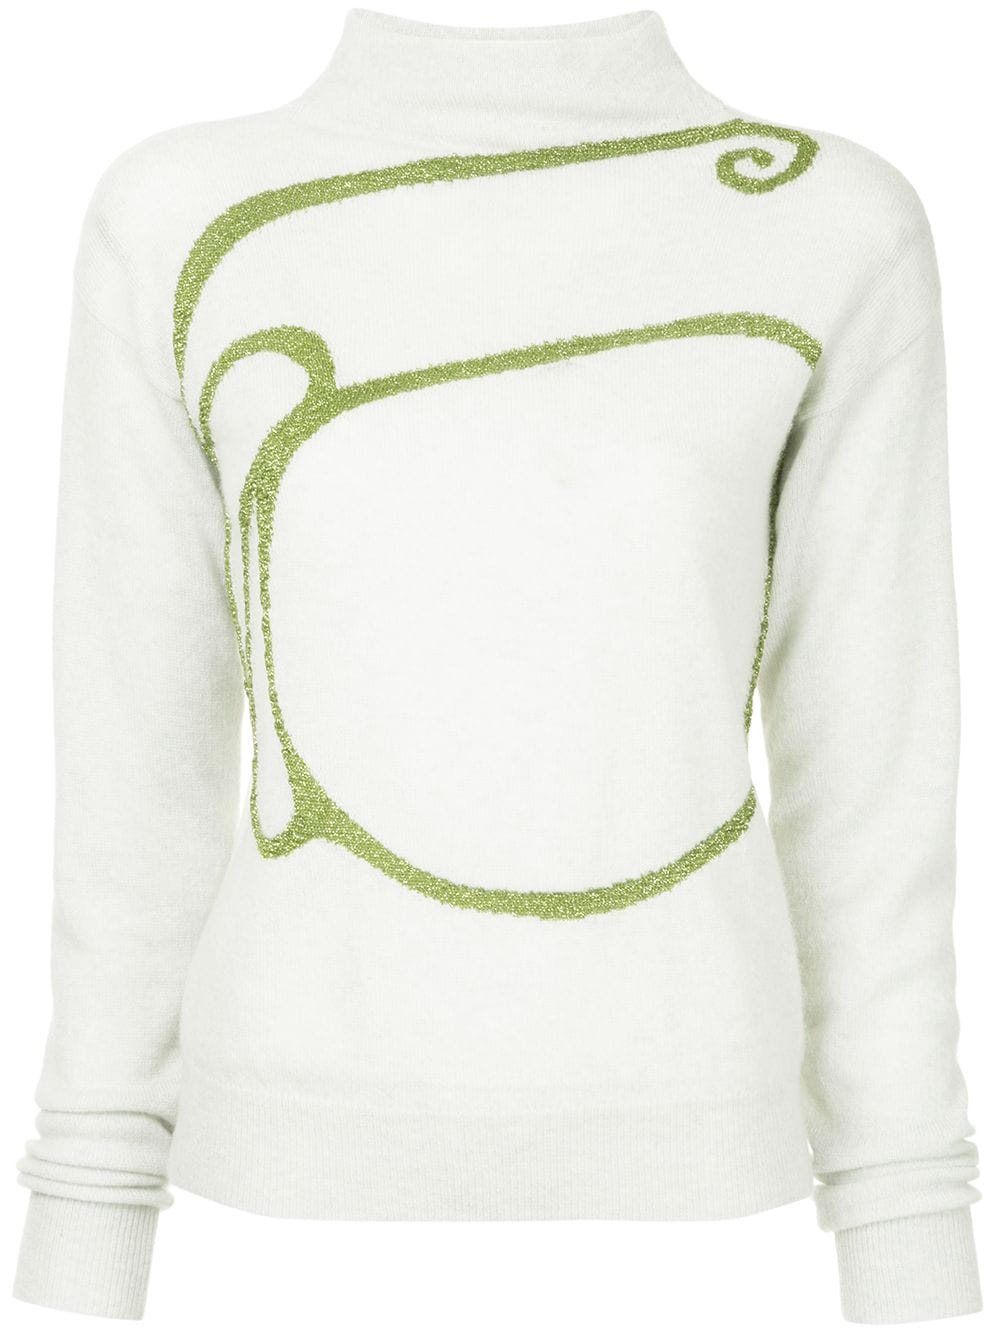 Onefifteen embroidered knit sweater - White von Onefifteen